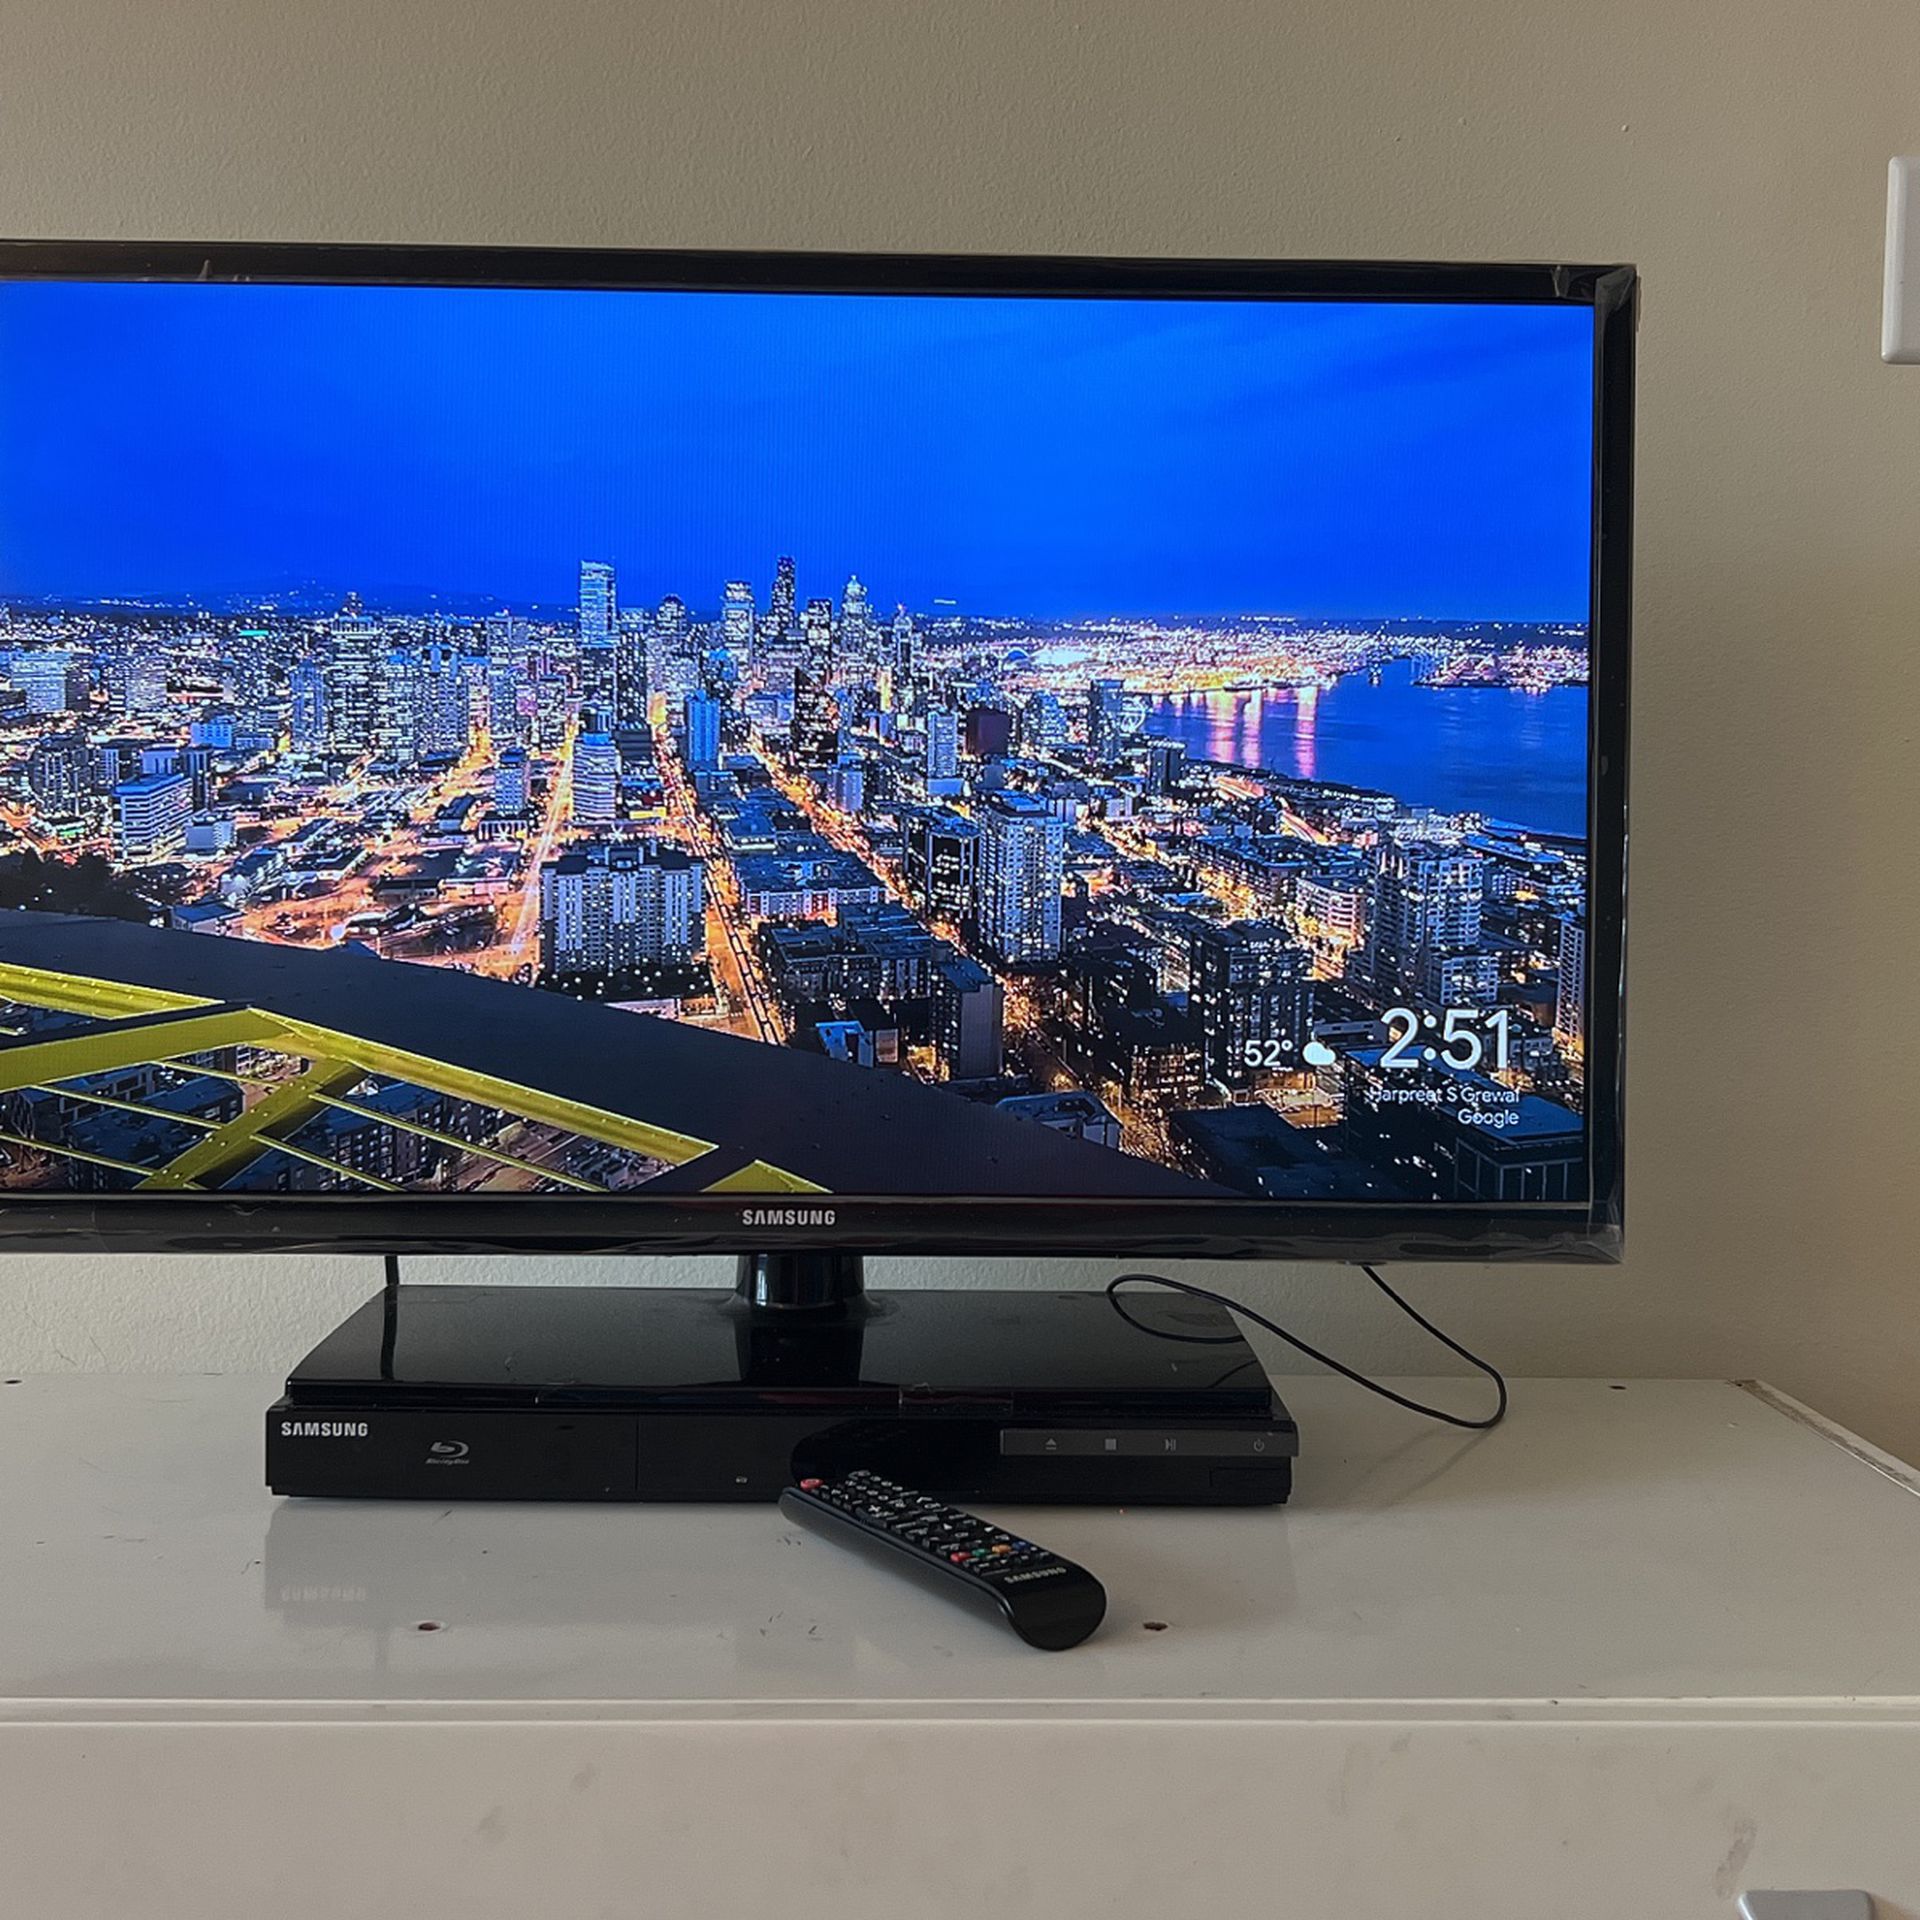 Samsung 32 ' Inch Class LED TV With Remote for Sale in Queens, NY - OfferUp